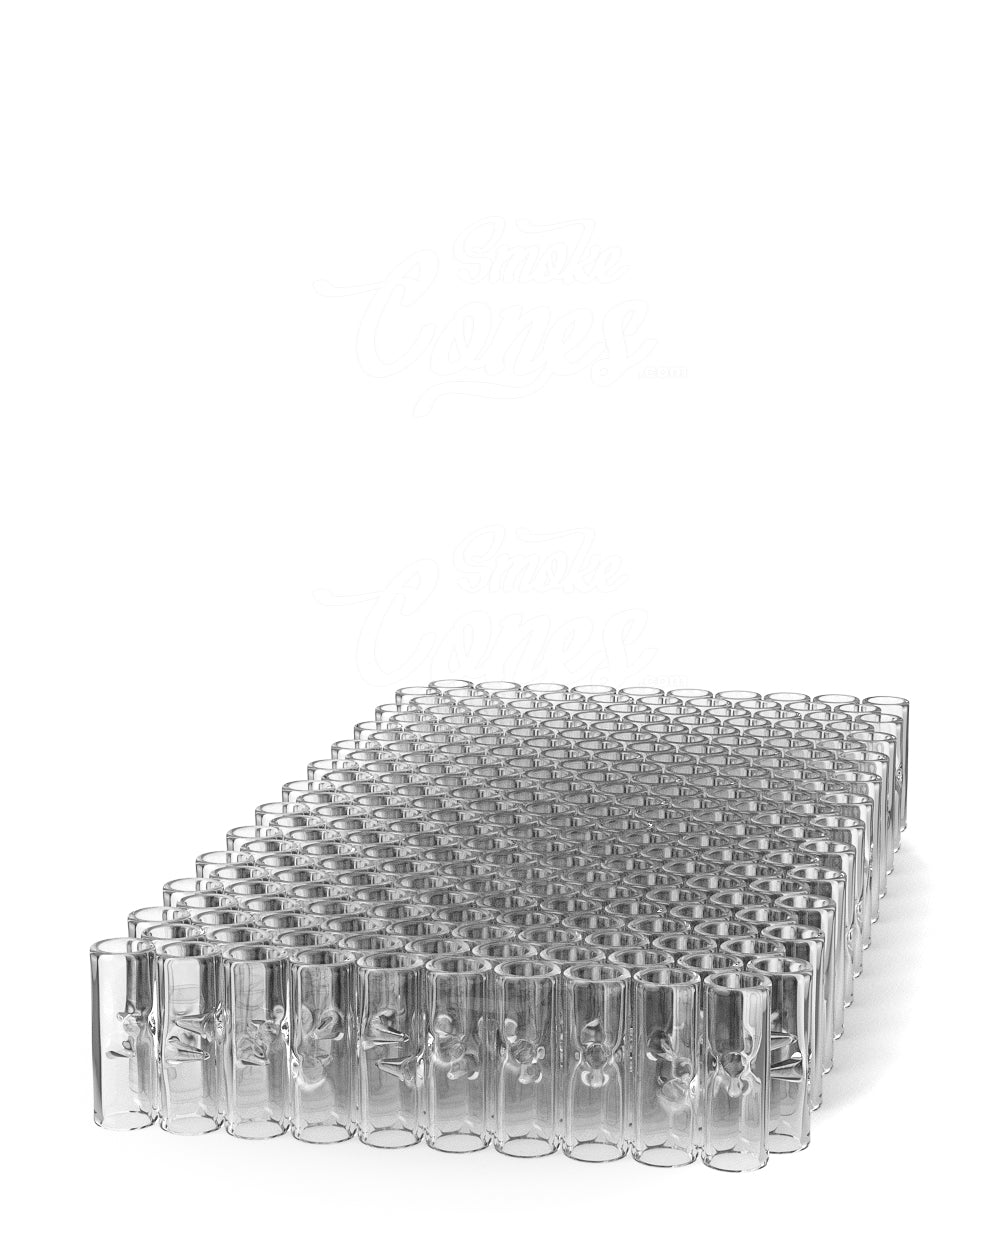 Clear 10mm Notched Glass Smoking Filter Tips 175/Box